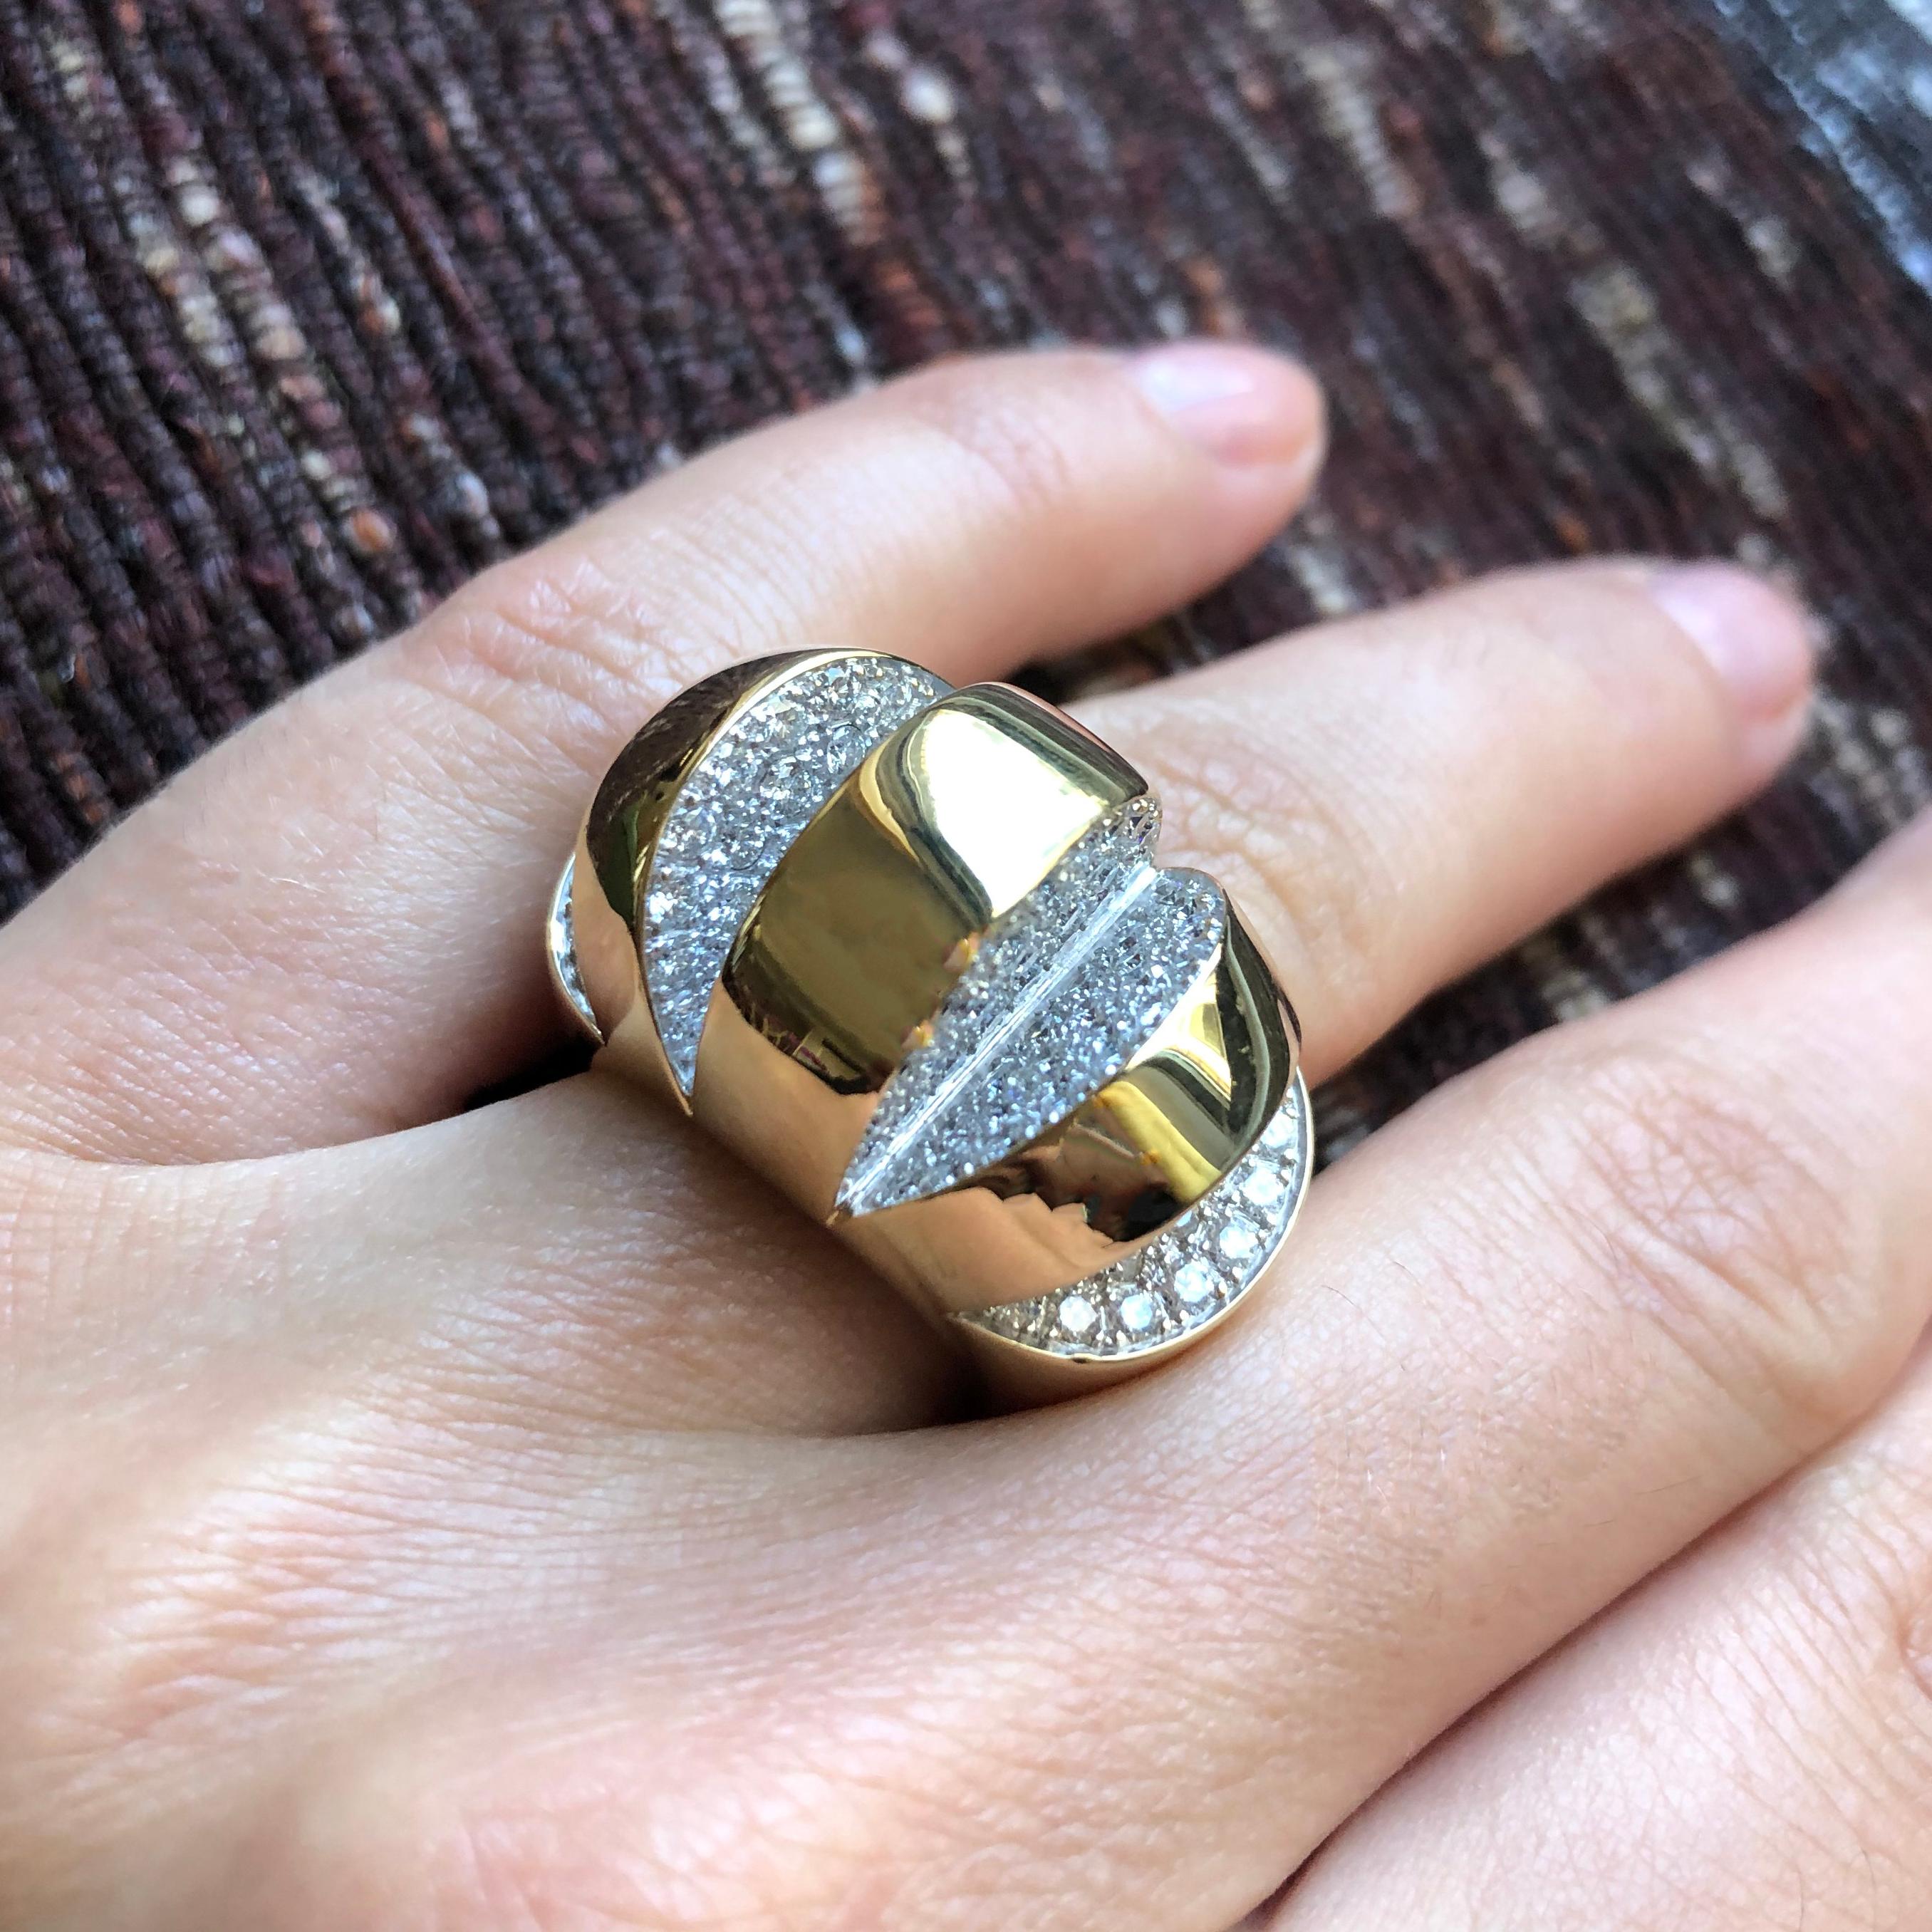 A true showstopper and beautifully crafted, this is the cocktail ring to own. It is a diamond pave and 18 karat gold cut-out ring, c. 1980, a rich gold circle which has been opened up to reveal several parts. The ring has approximately 4 carats of